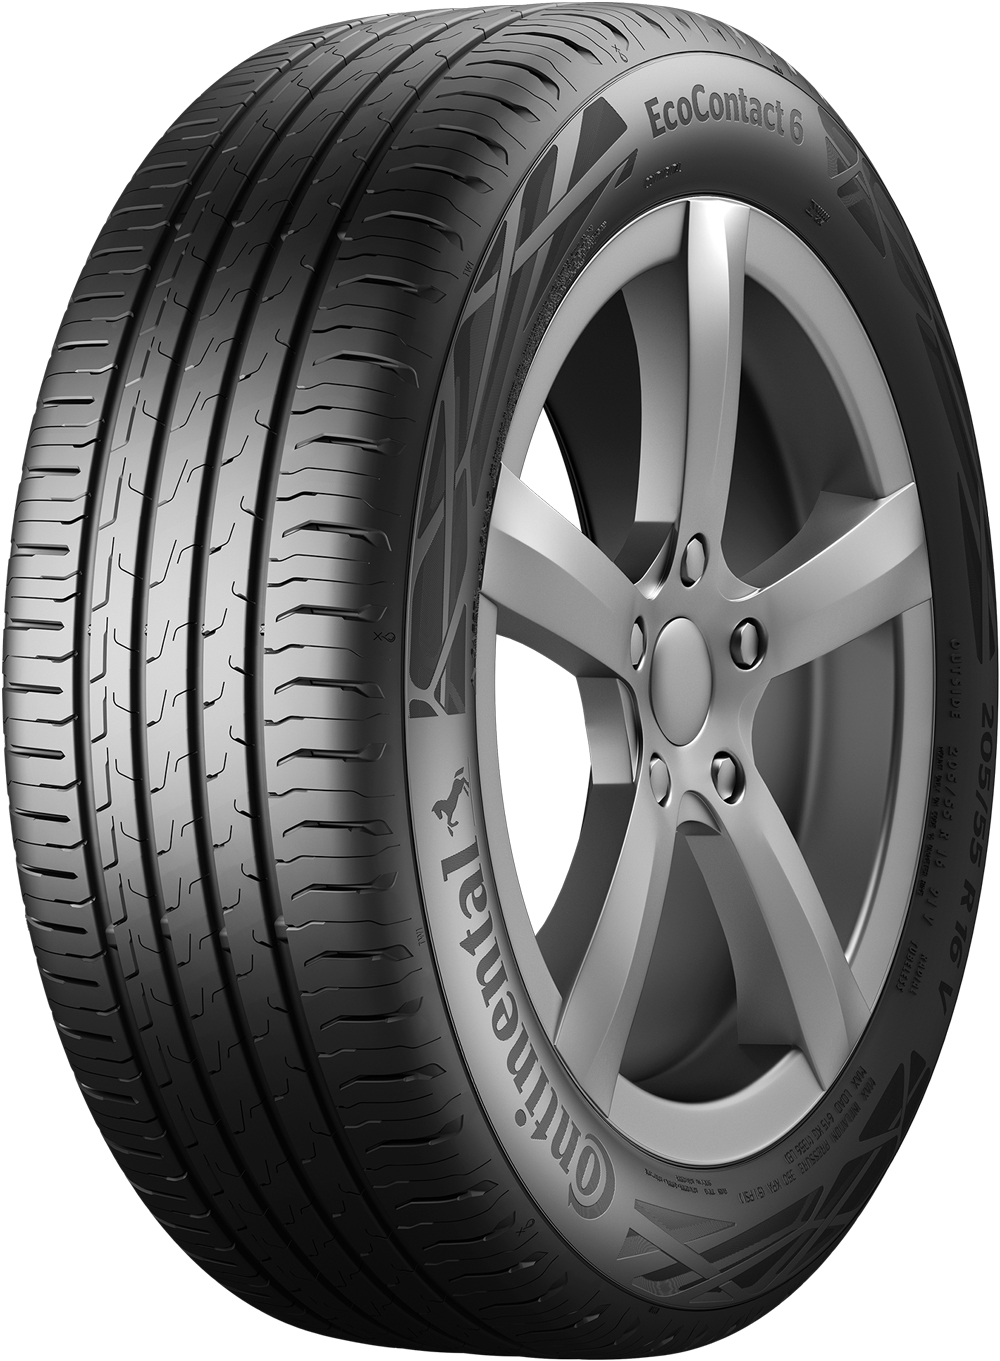 Anvelope auto CONTINENTAL ECOCONTACT 6 175/55 R20 85Q